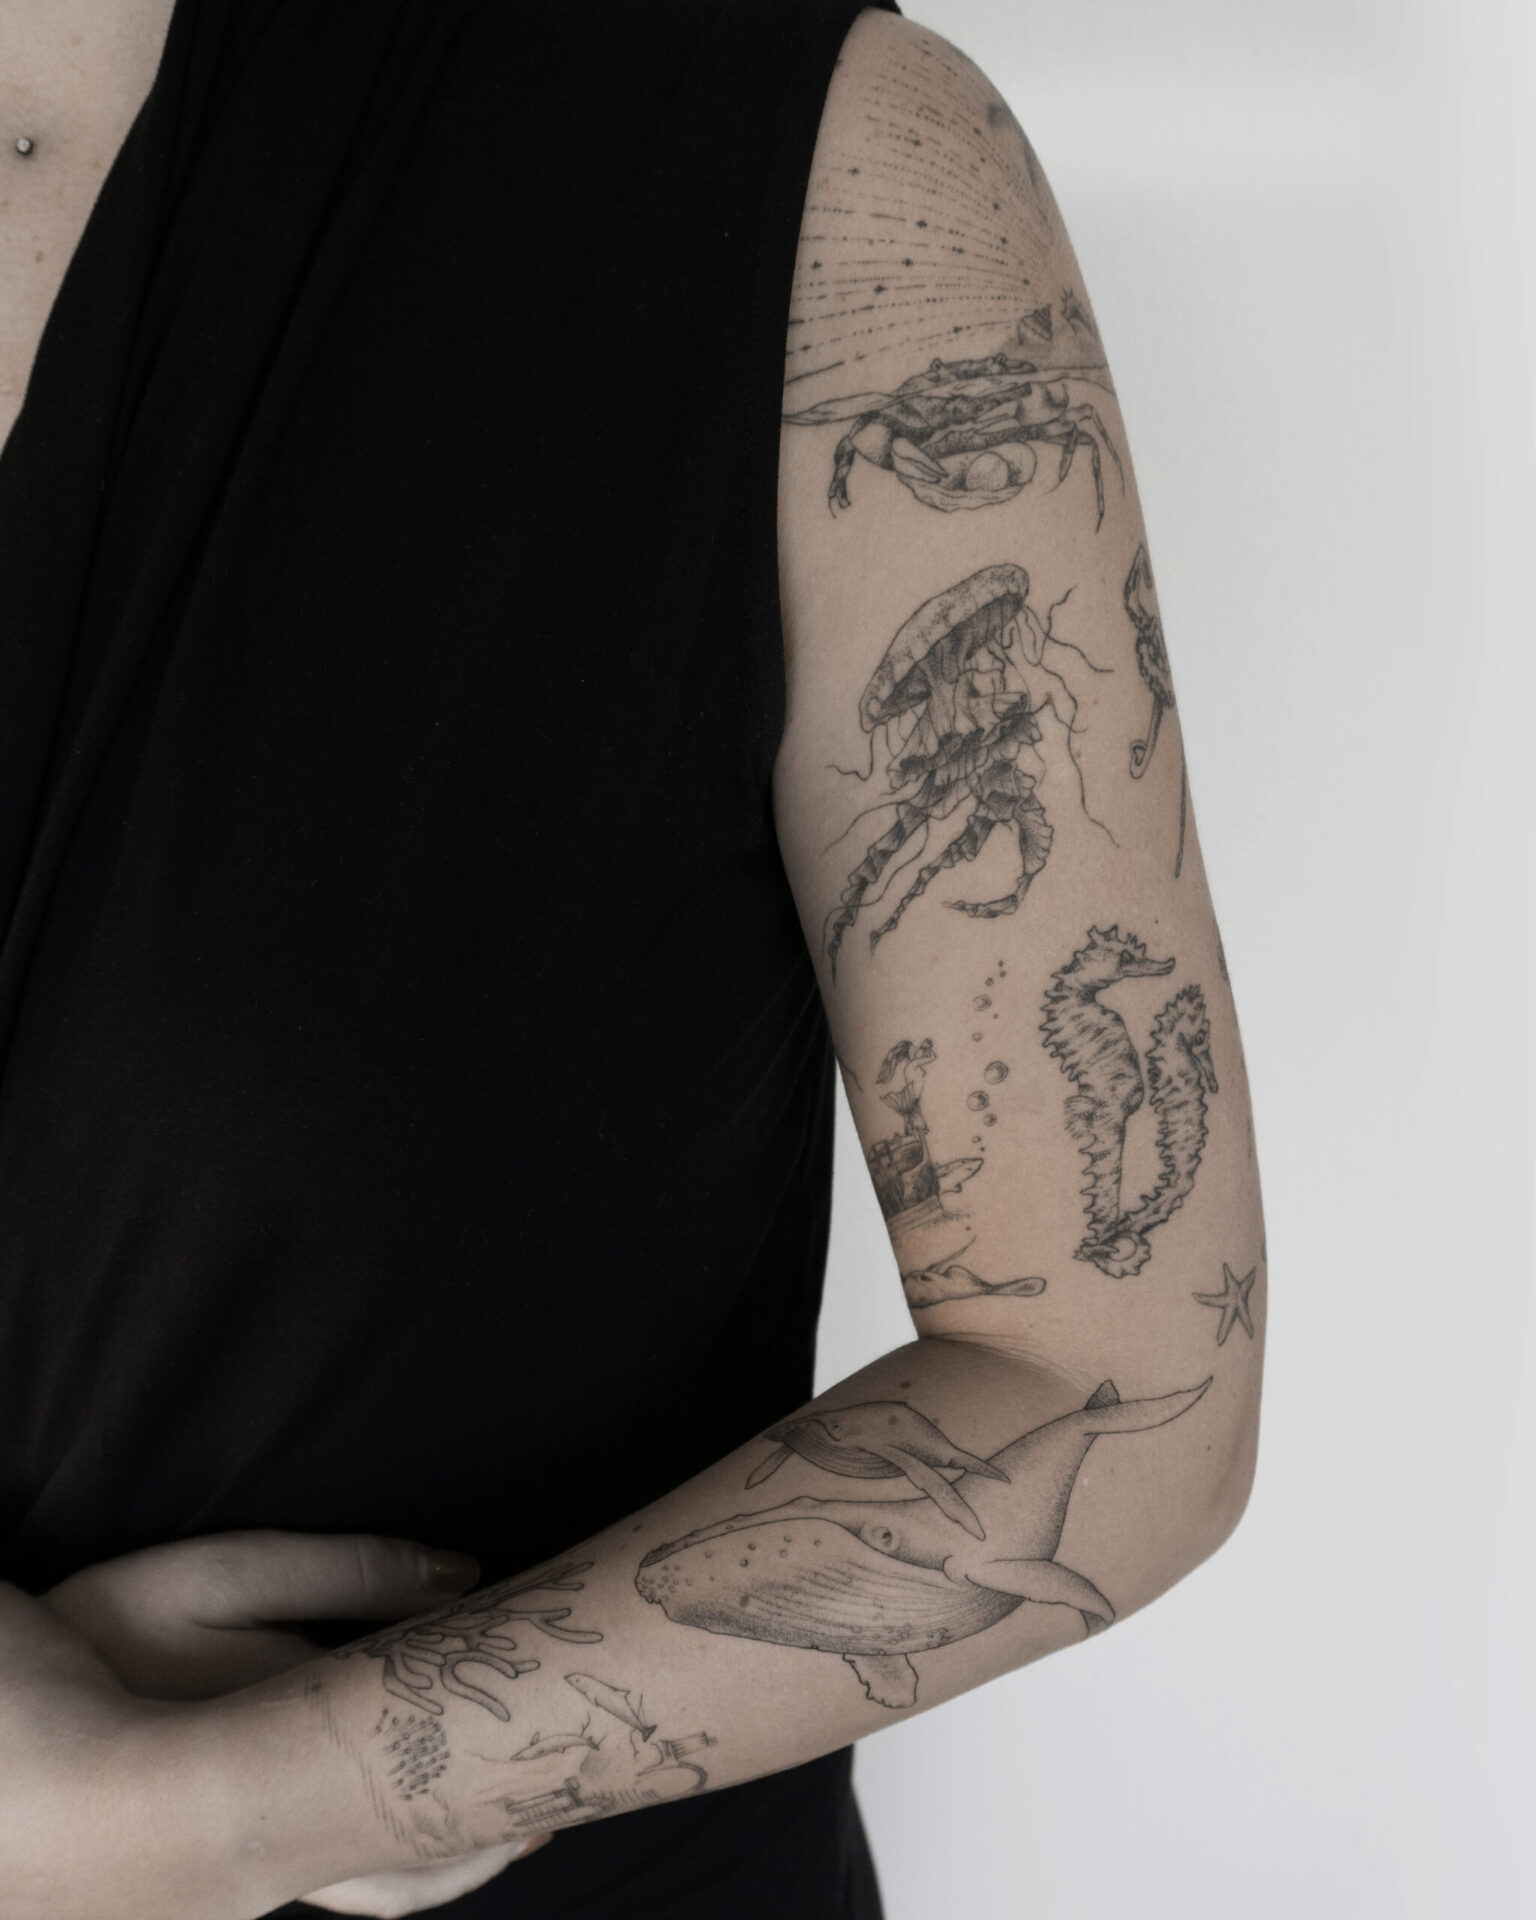 fineline sea sleeve tattoo with whale jellyfish fish shark statue and a lot more from smasli ink an female tattoo artist working in salzburg austria